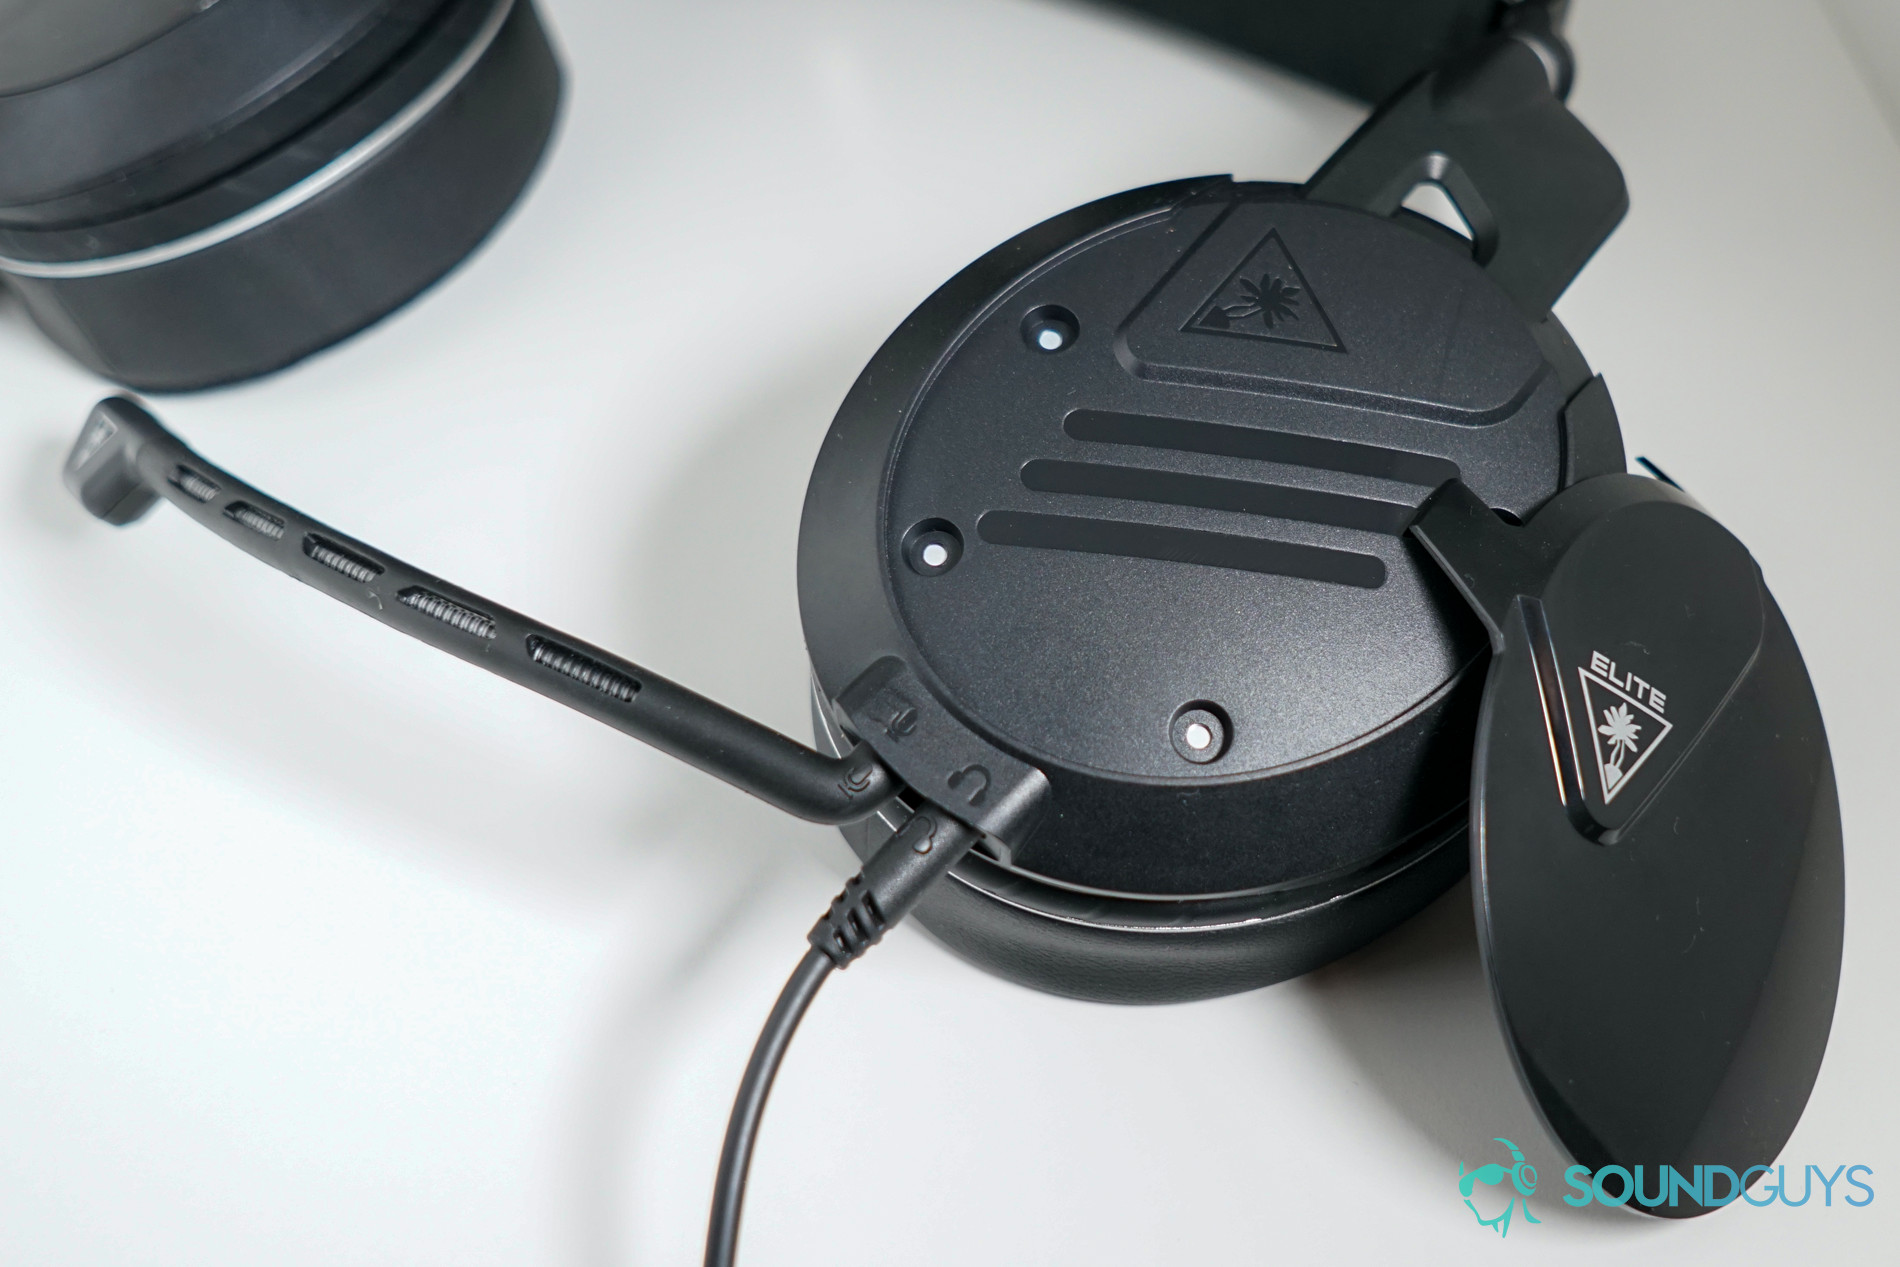 The Turtle Beach Elite Pro 2 gaming headset lays on a white surface with its face plate off.